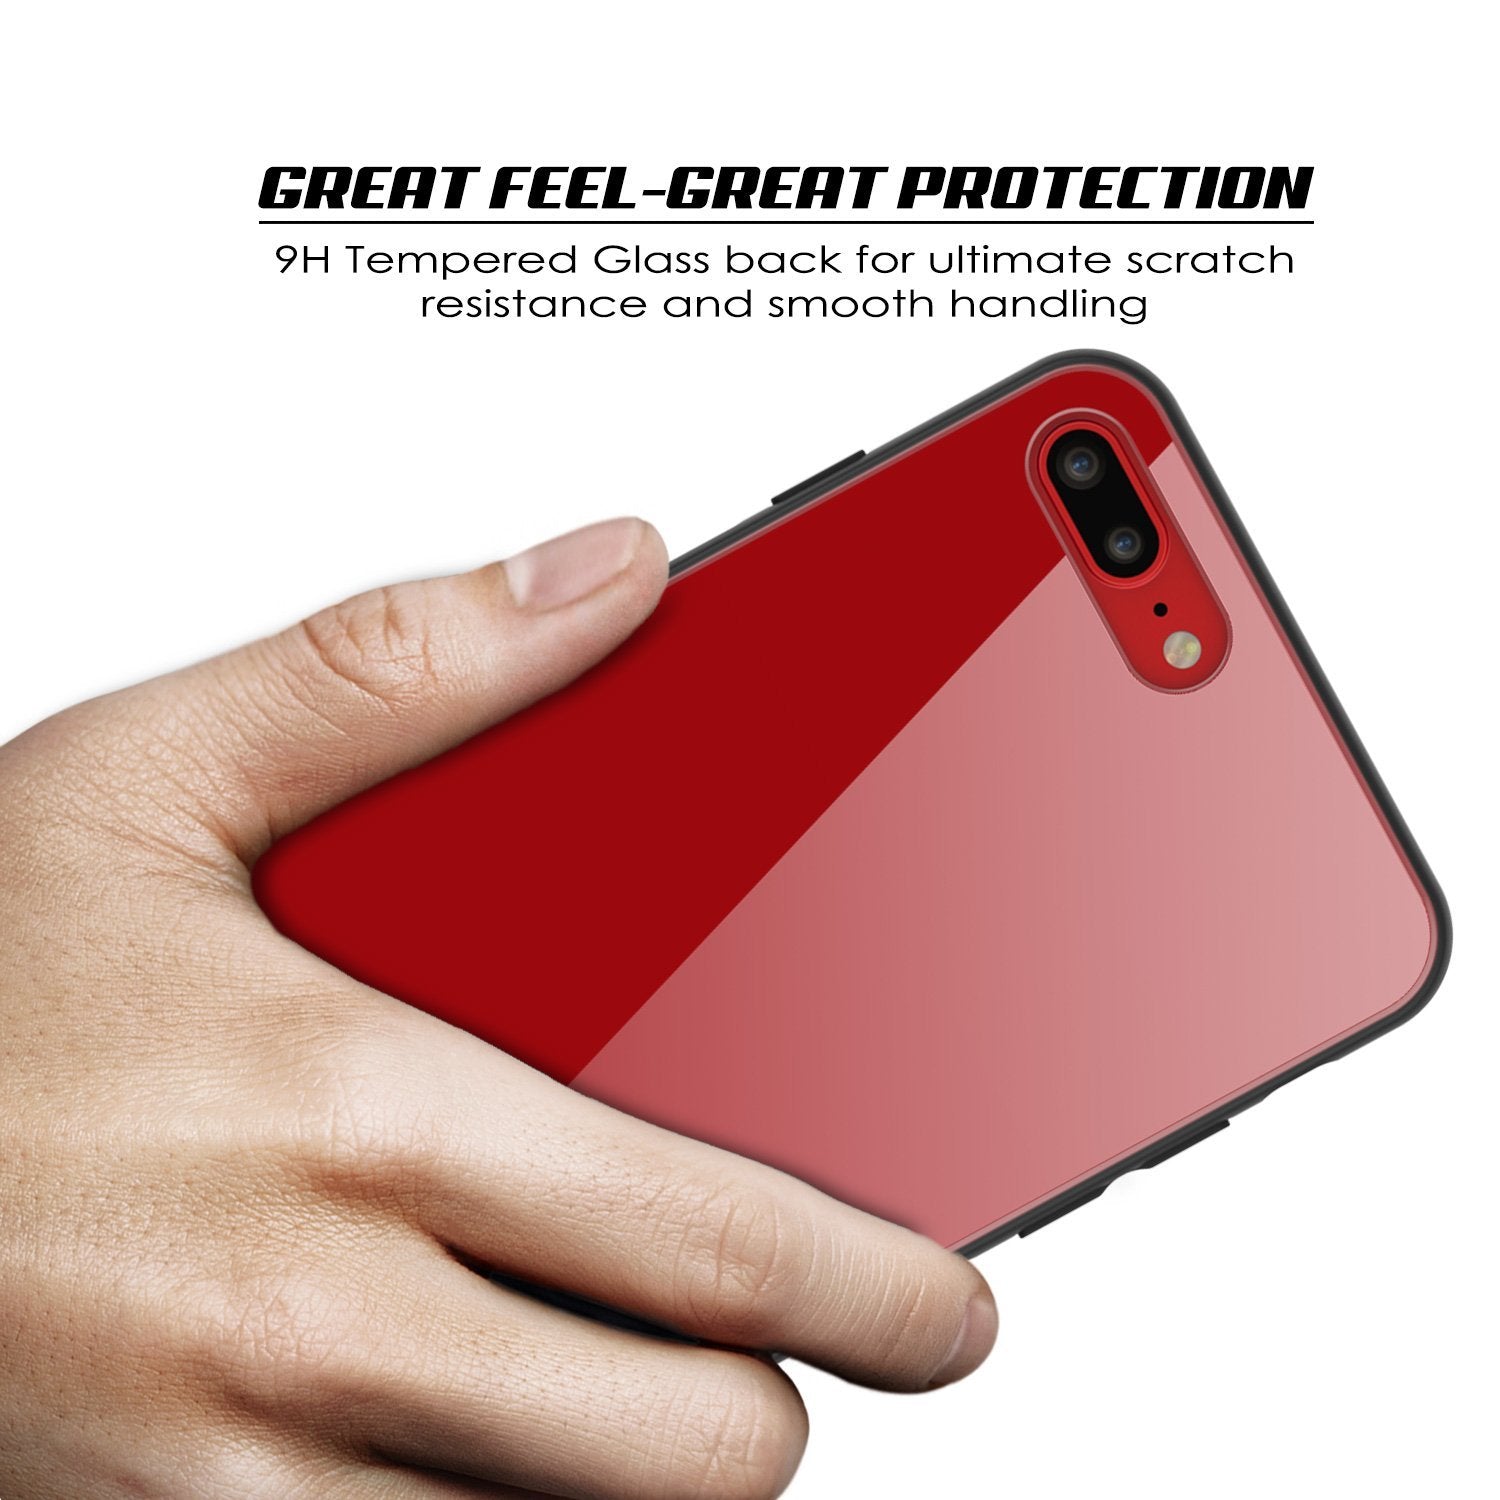 iPhone 8 PLUS Case, Punkcase GlassShield Ultra Thin Protective 9H Full Body Tempered Glass Cover W/ Drop Protection & Non Slip Grip for Apple iPhone 7 PLUS / Apple iPhone 8 PLUS (Red) - PunkCase NZ